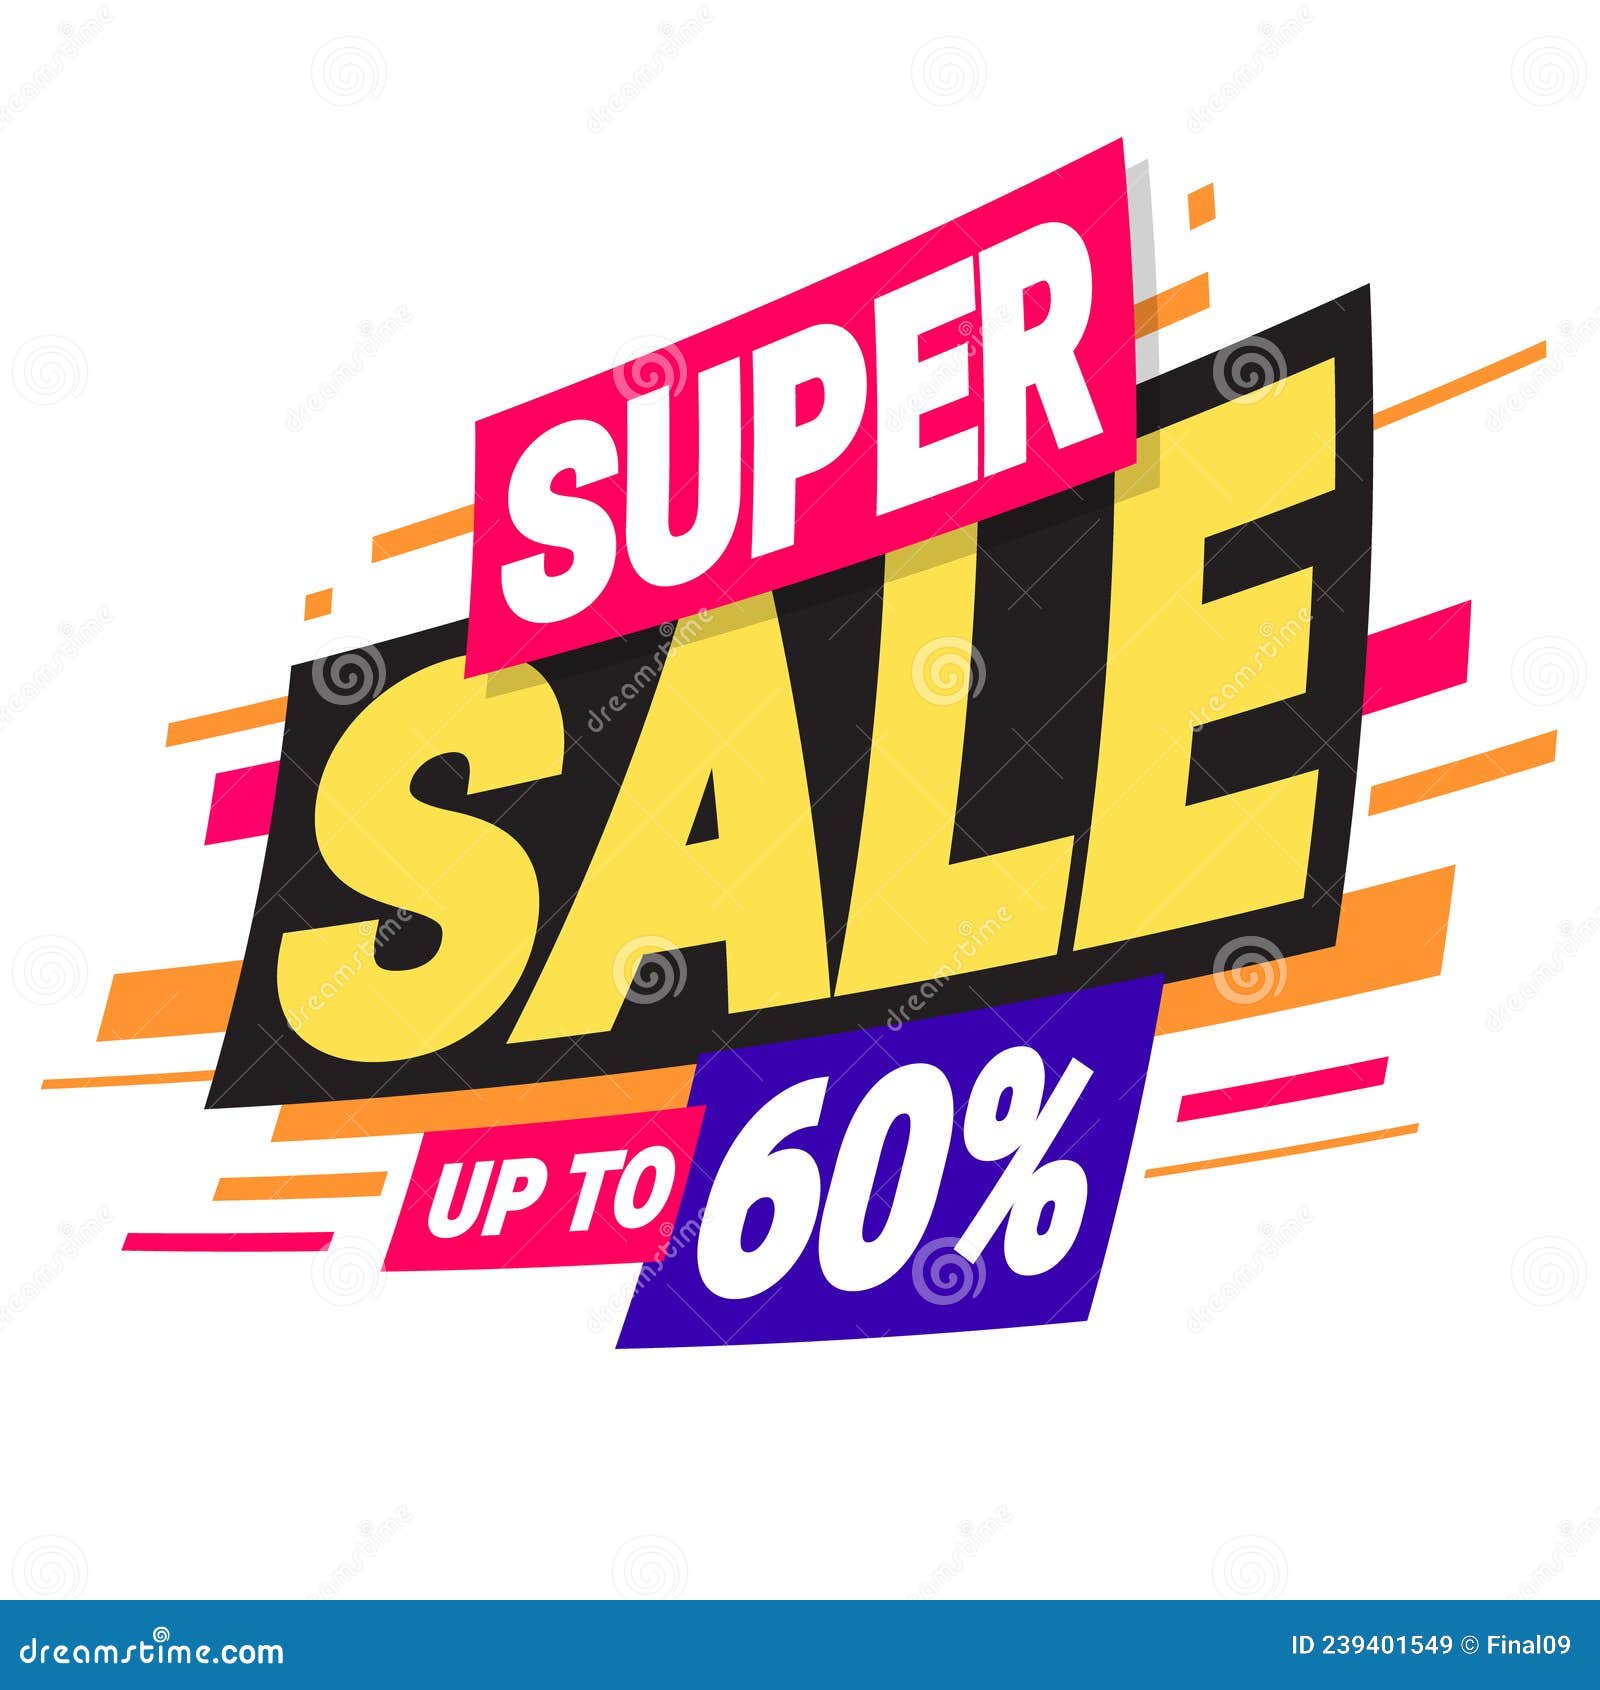 super sale advertising banner. this week only special offer